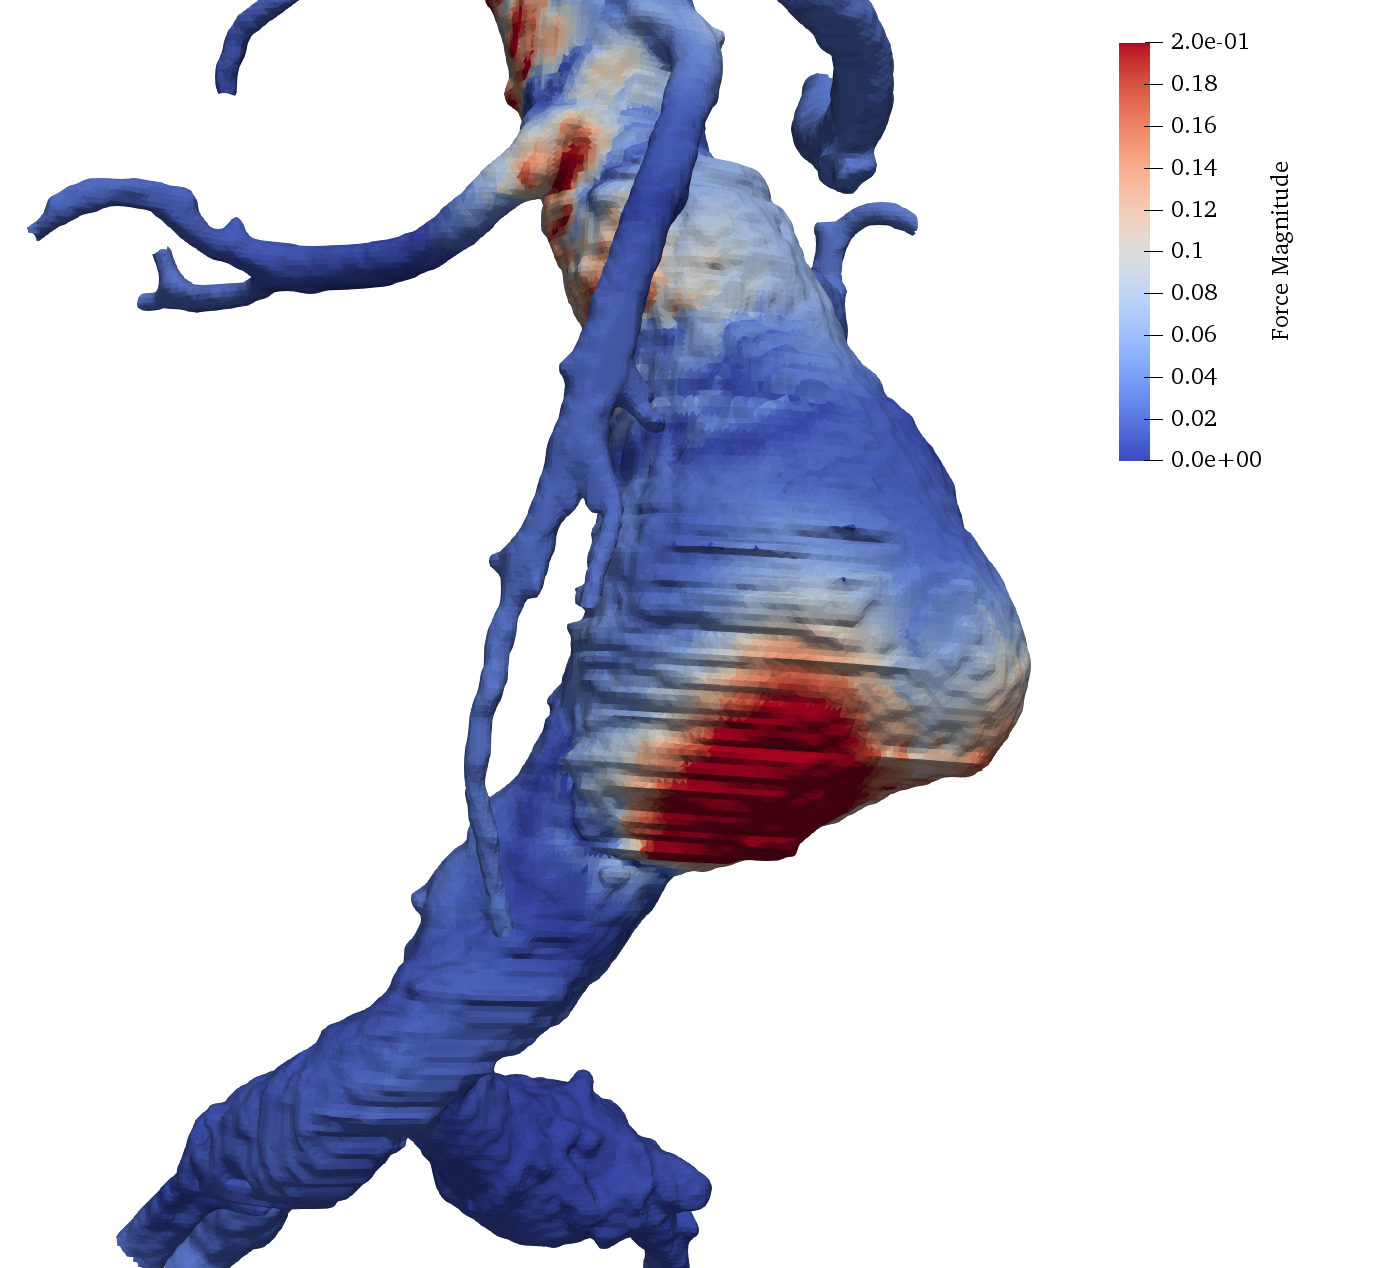 force distribution on the walls of the abdominal aorta in presence of an aneurysm.